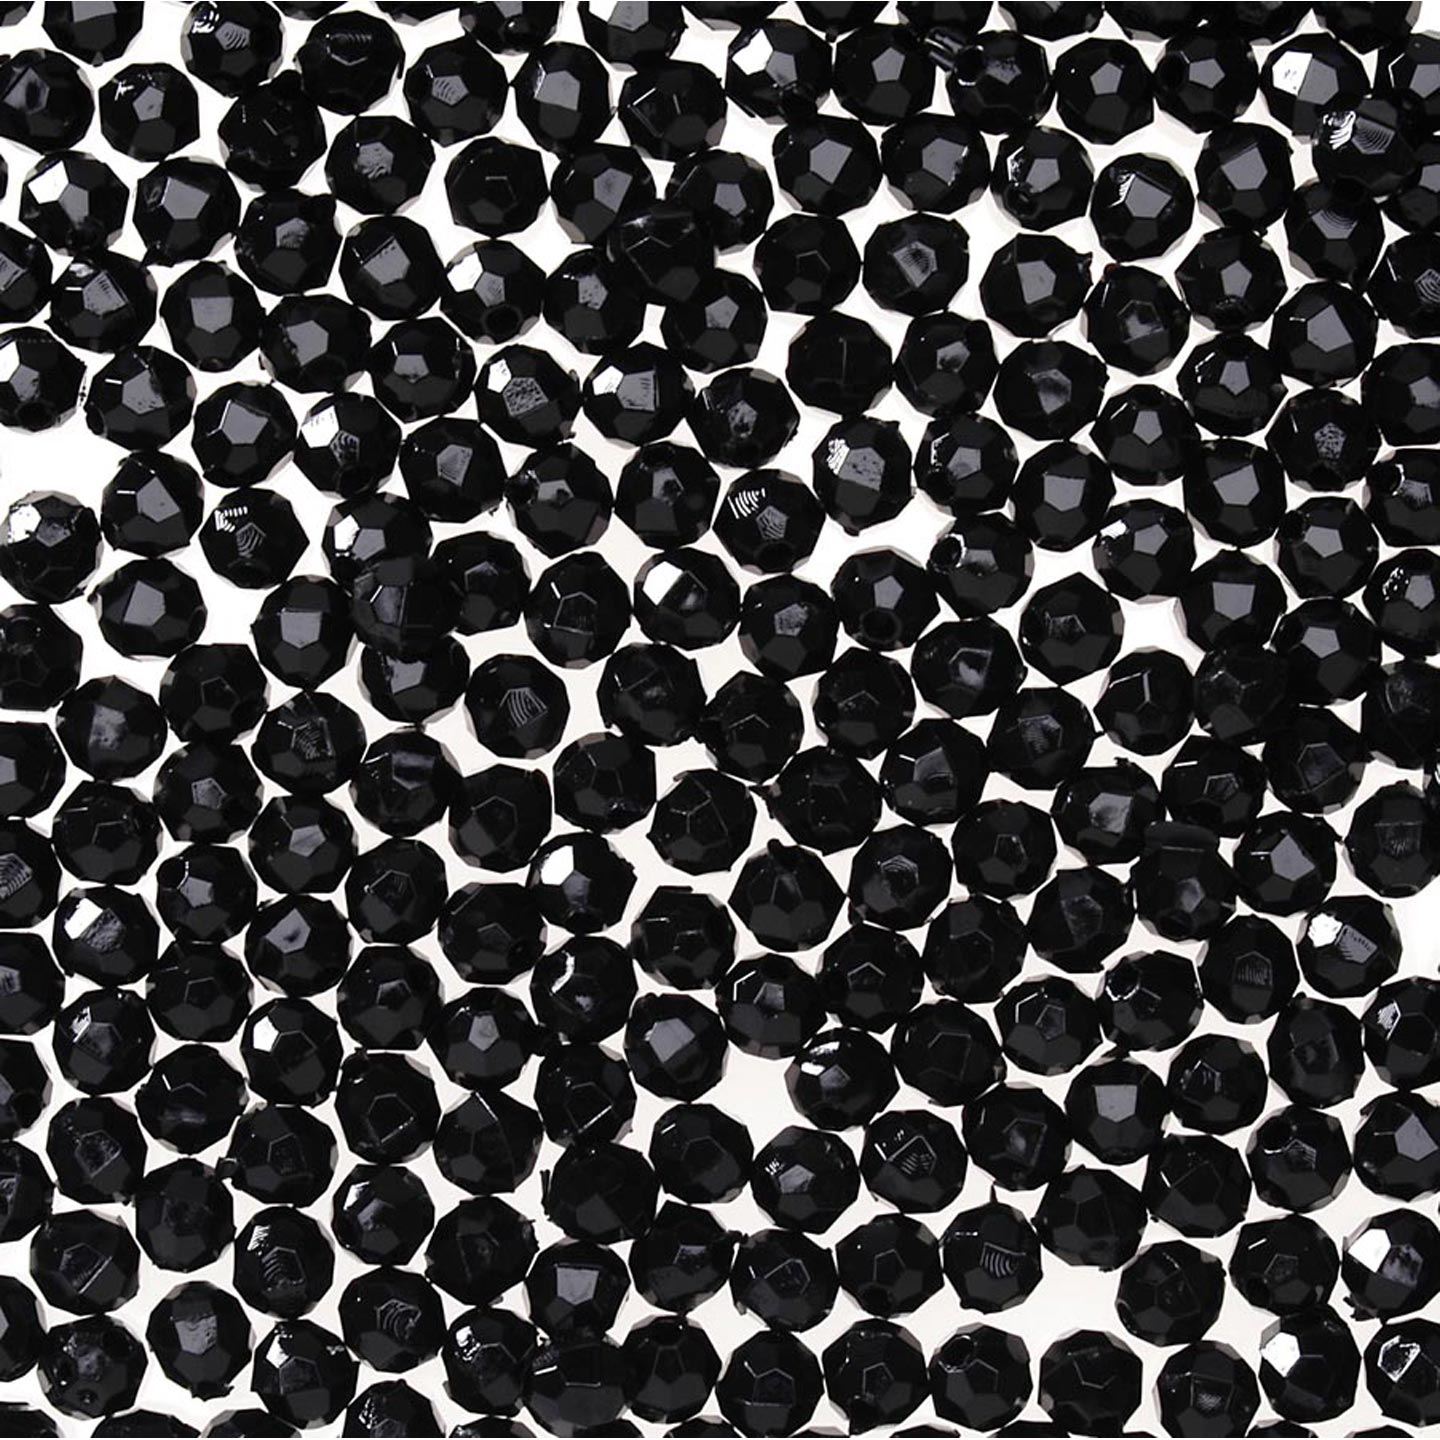 Black Faceted Beads - 4mm Faceted Beads - Acrylic Faceted Beads